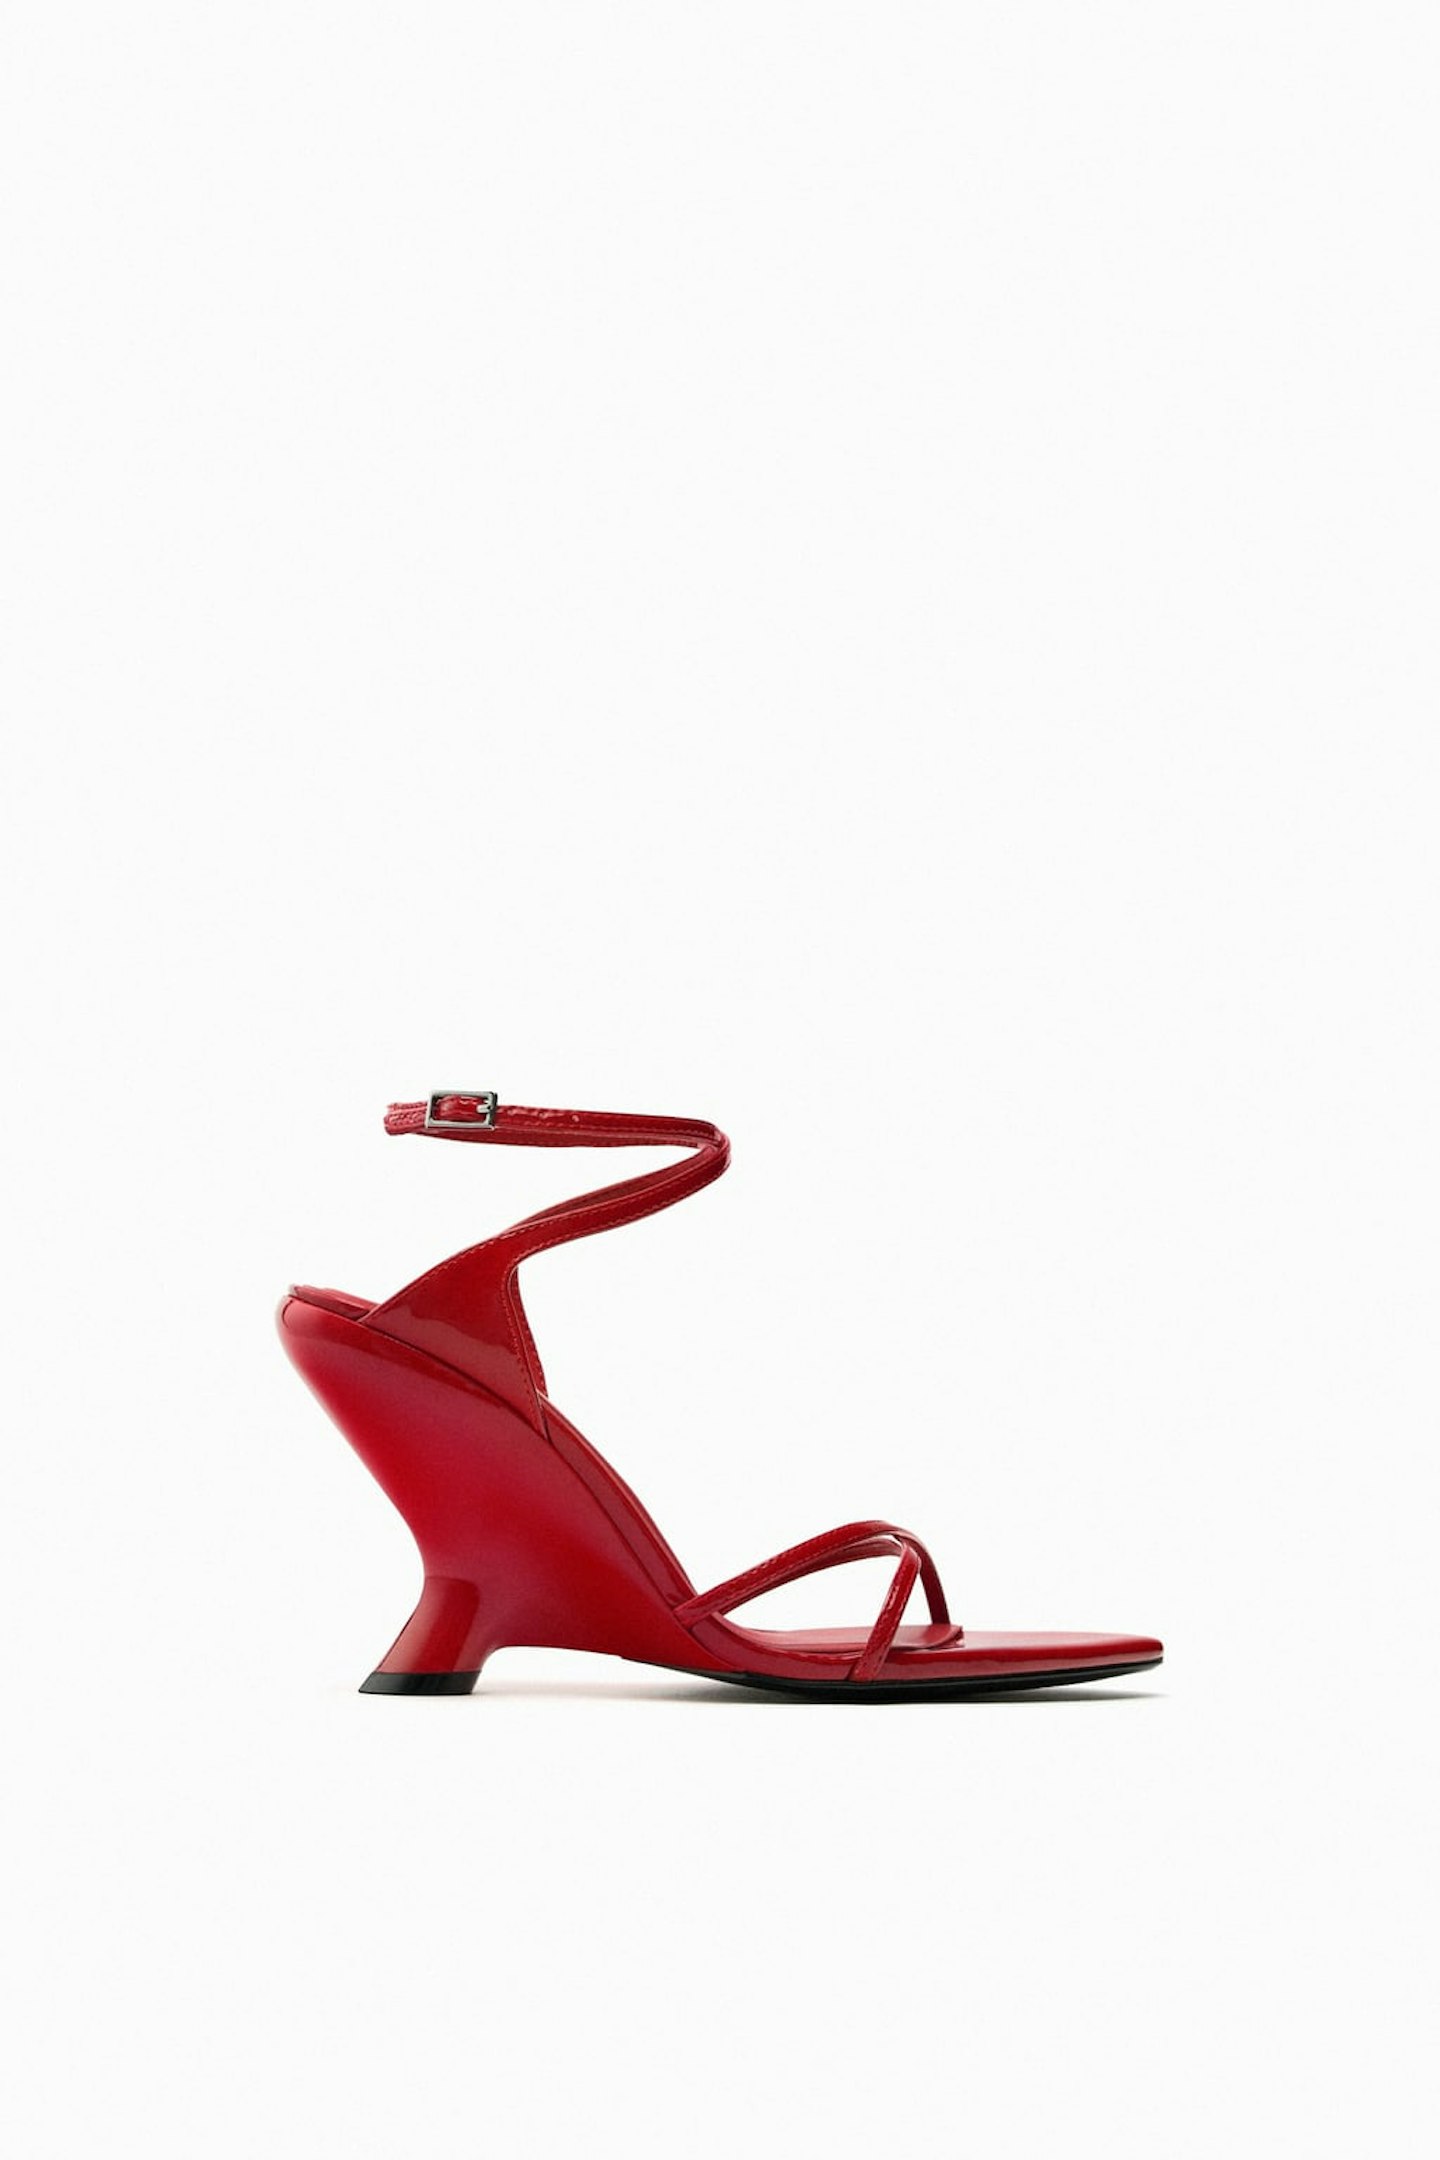 zara red shoes 